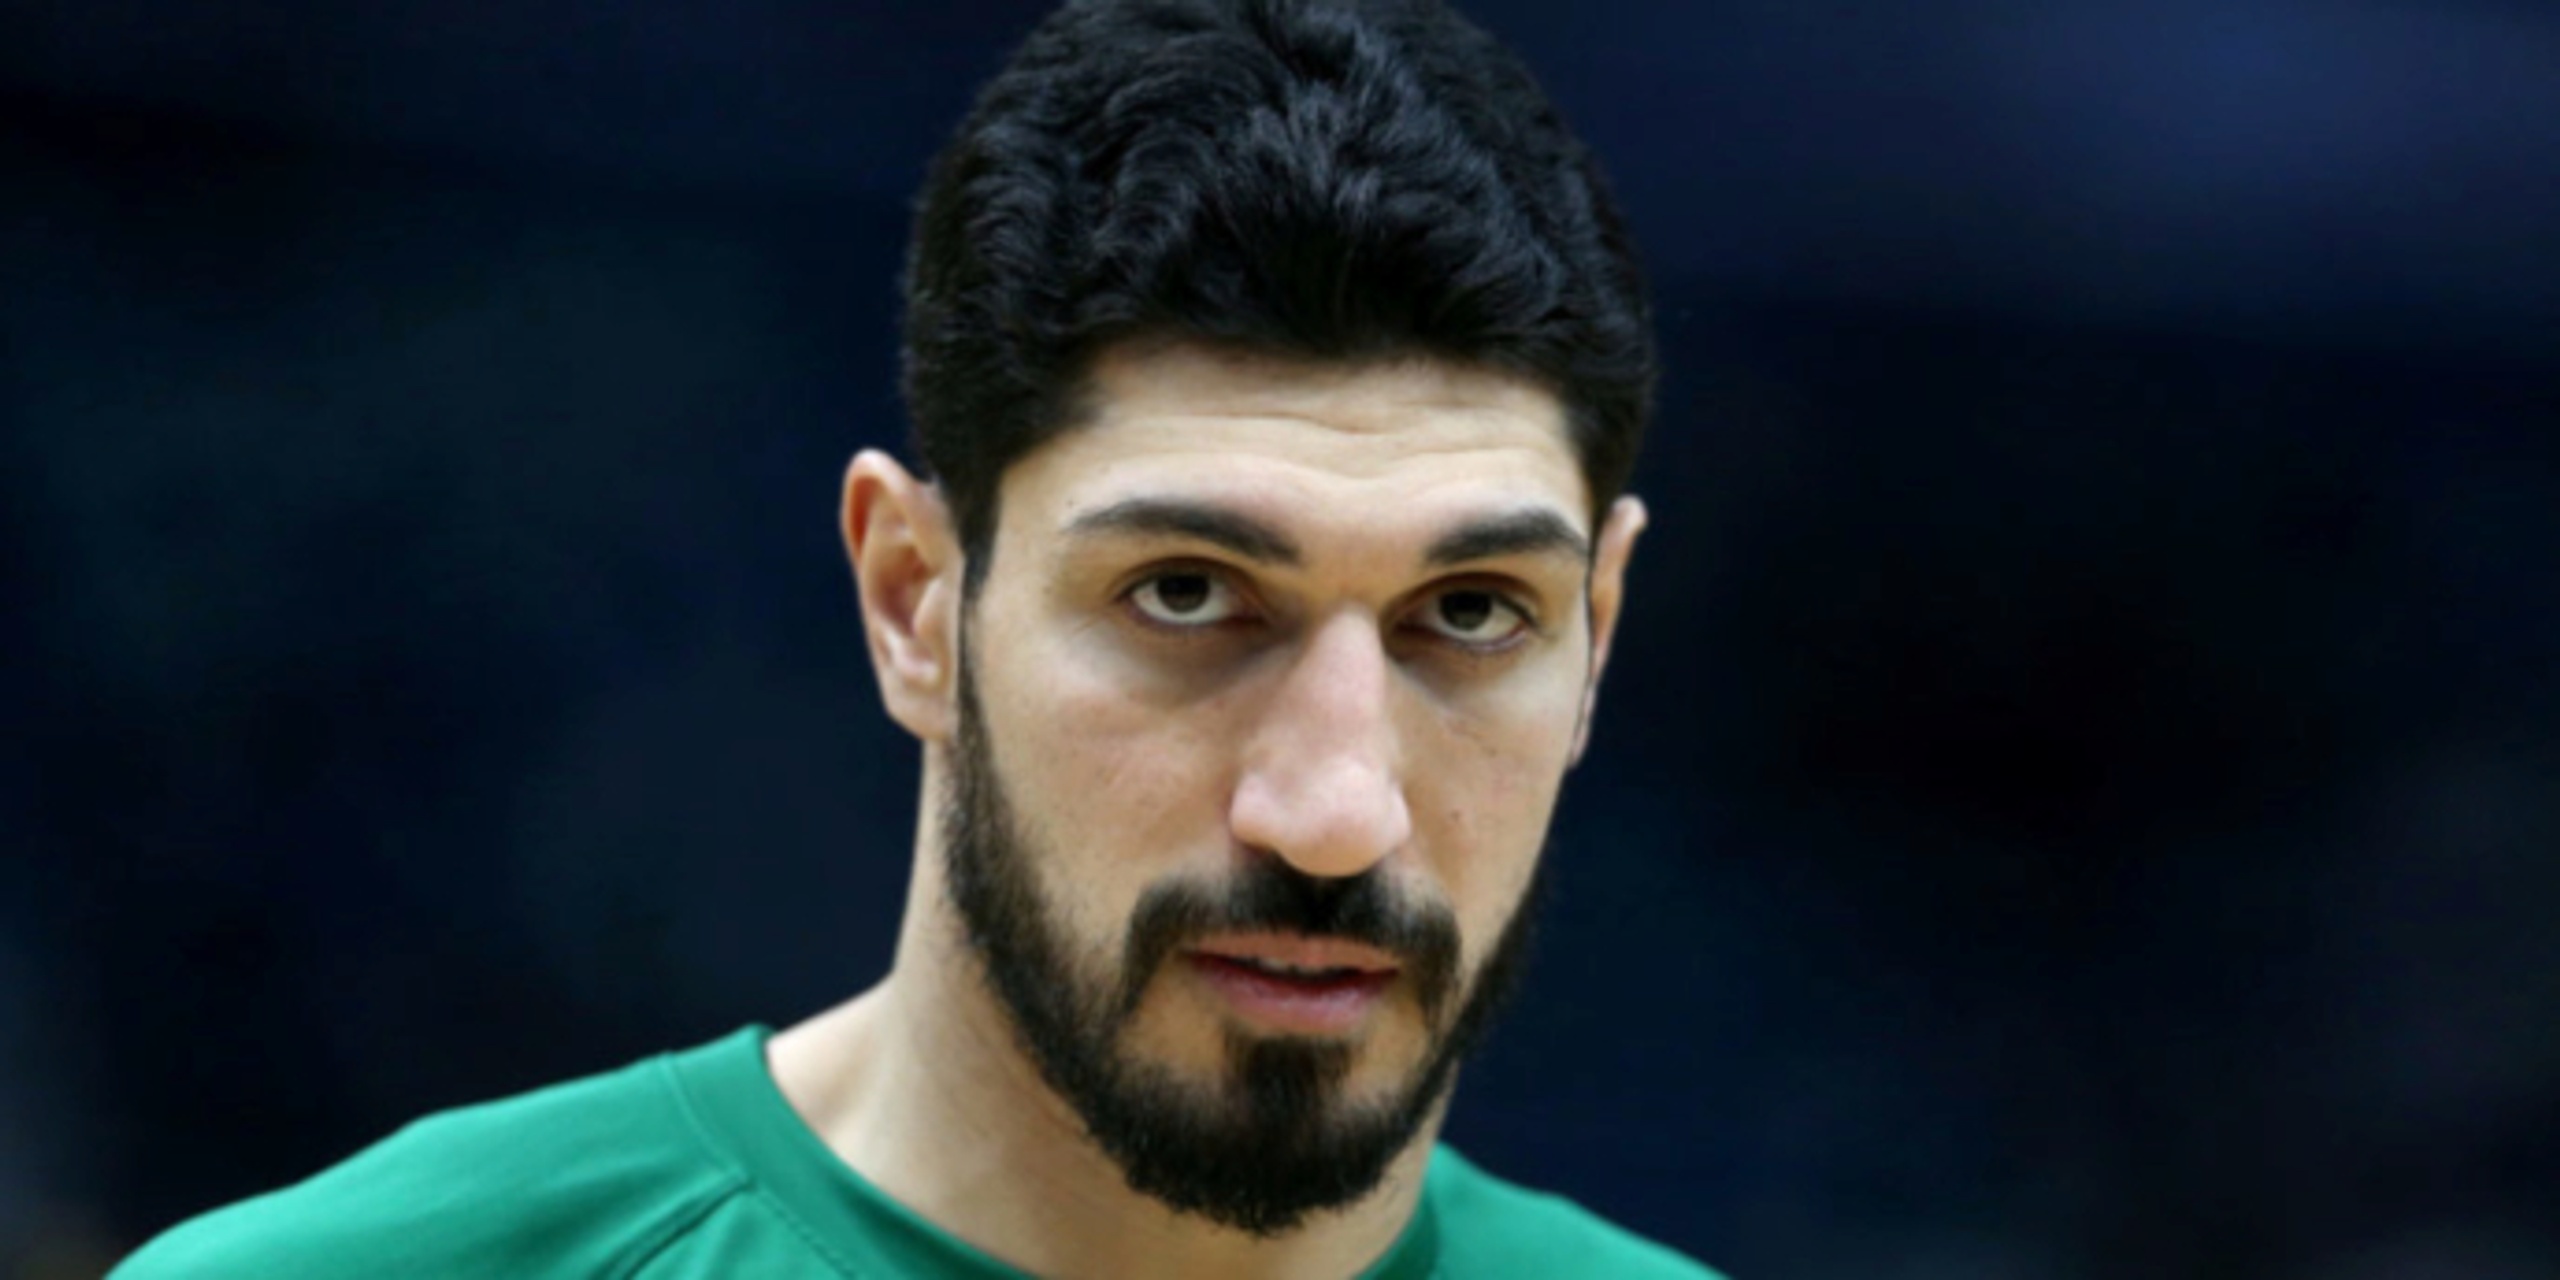 Rockets waive center Enes Freedom